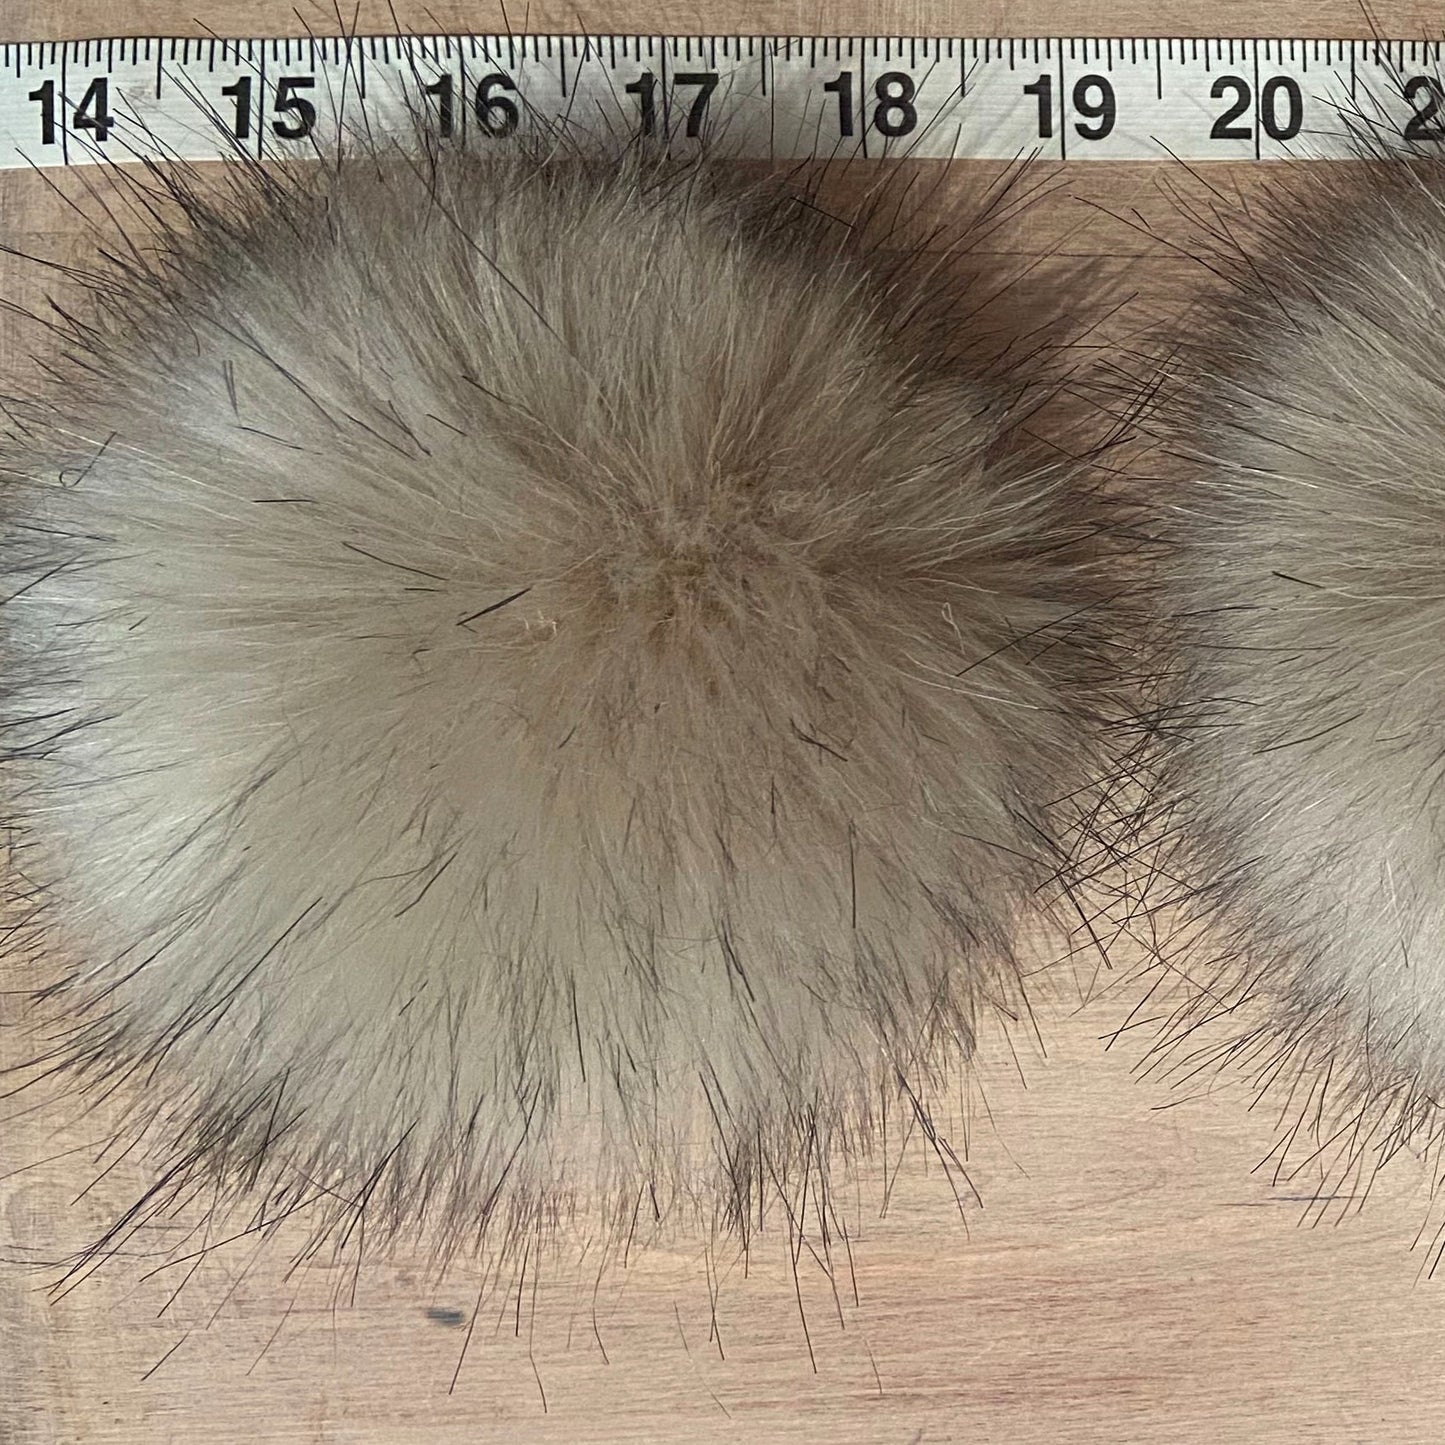 Tape Measurers Showing 4.5 Inch Size of Pom